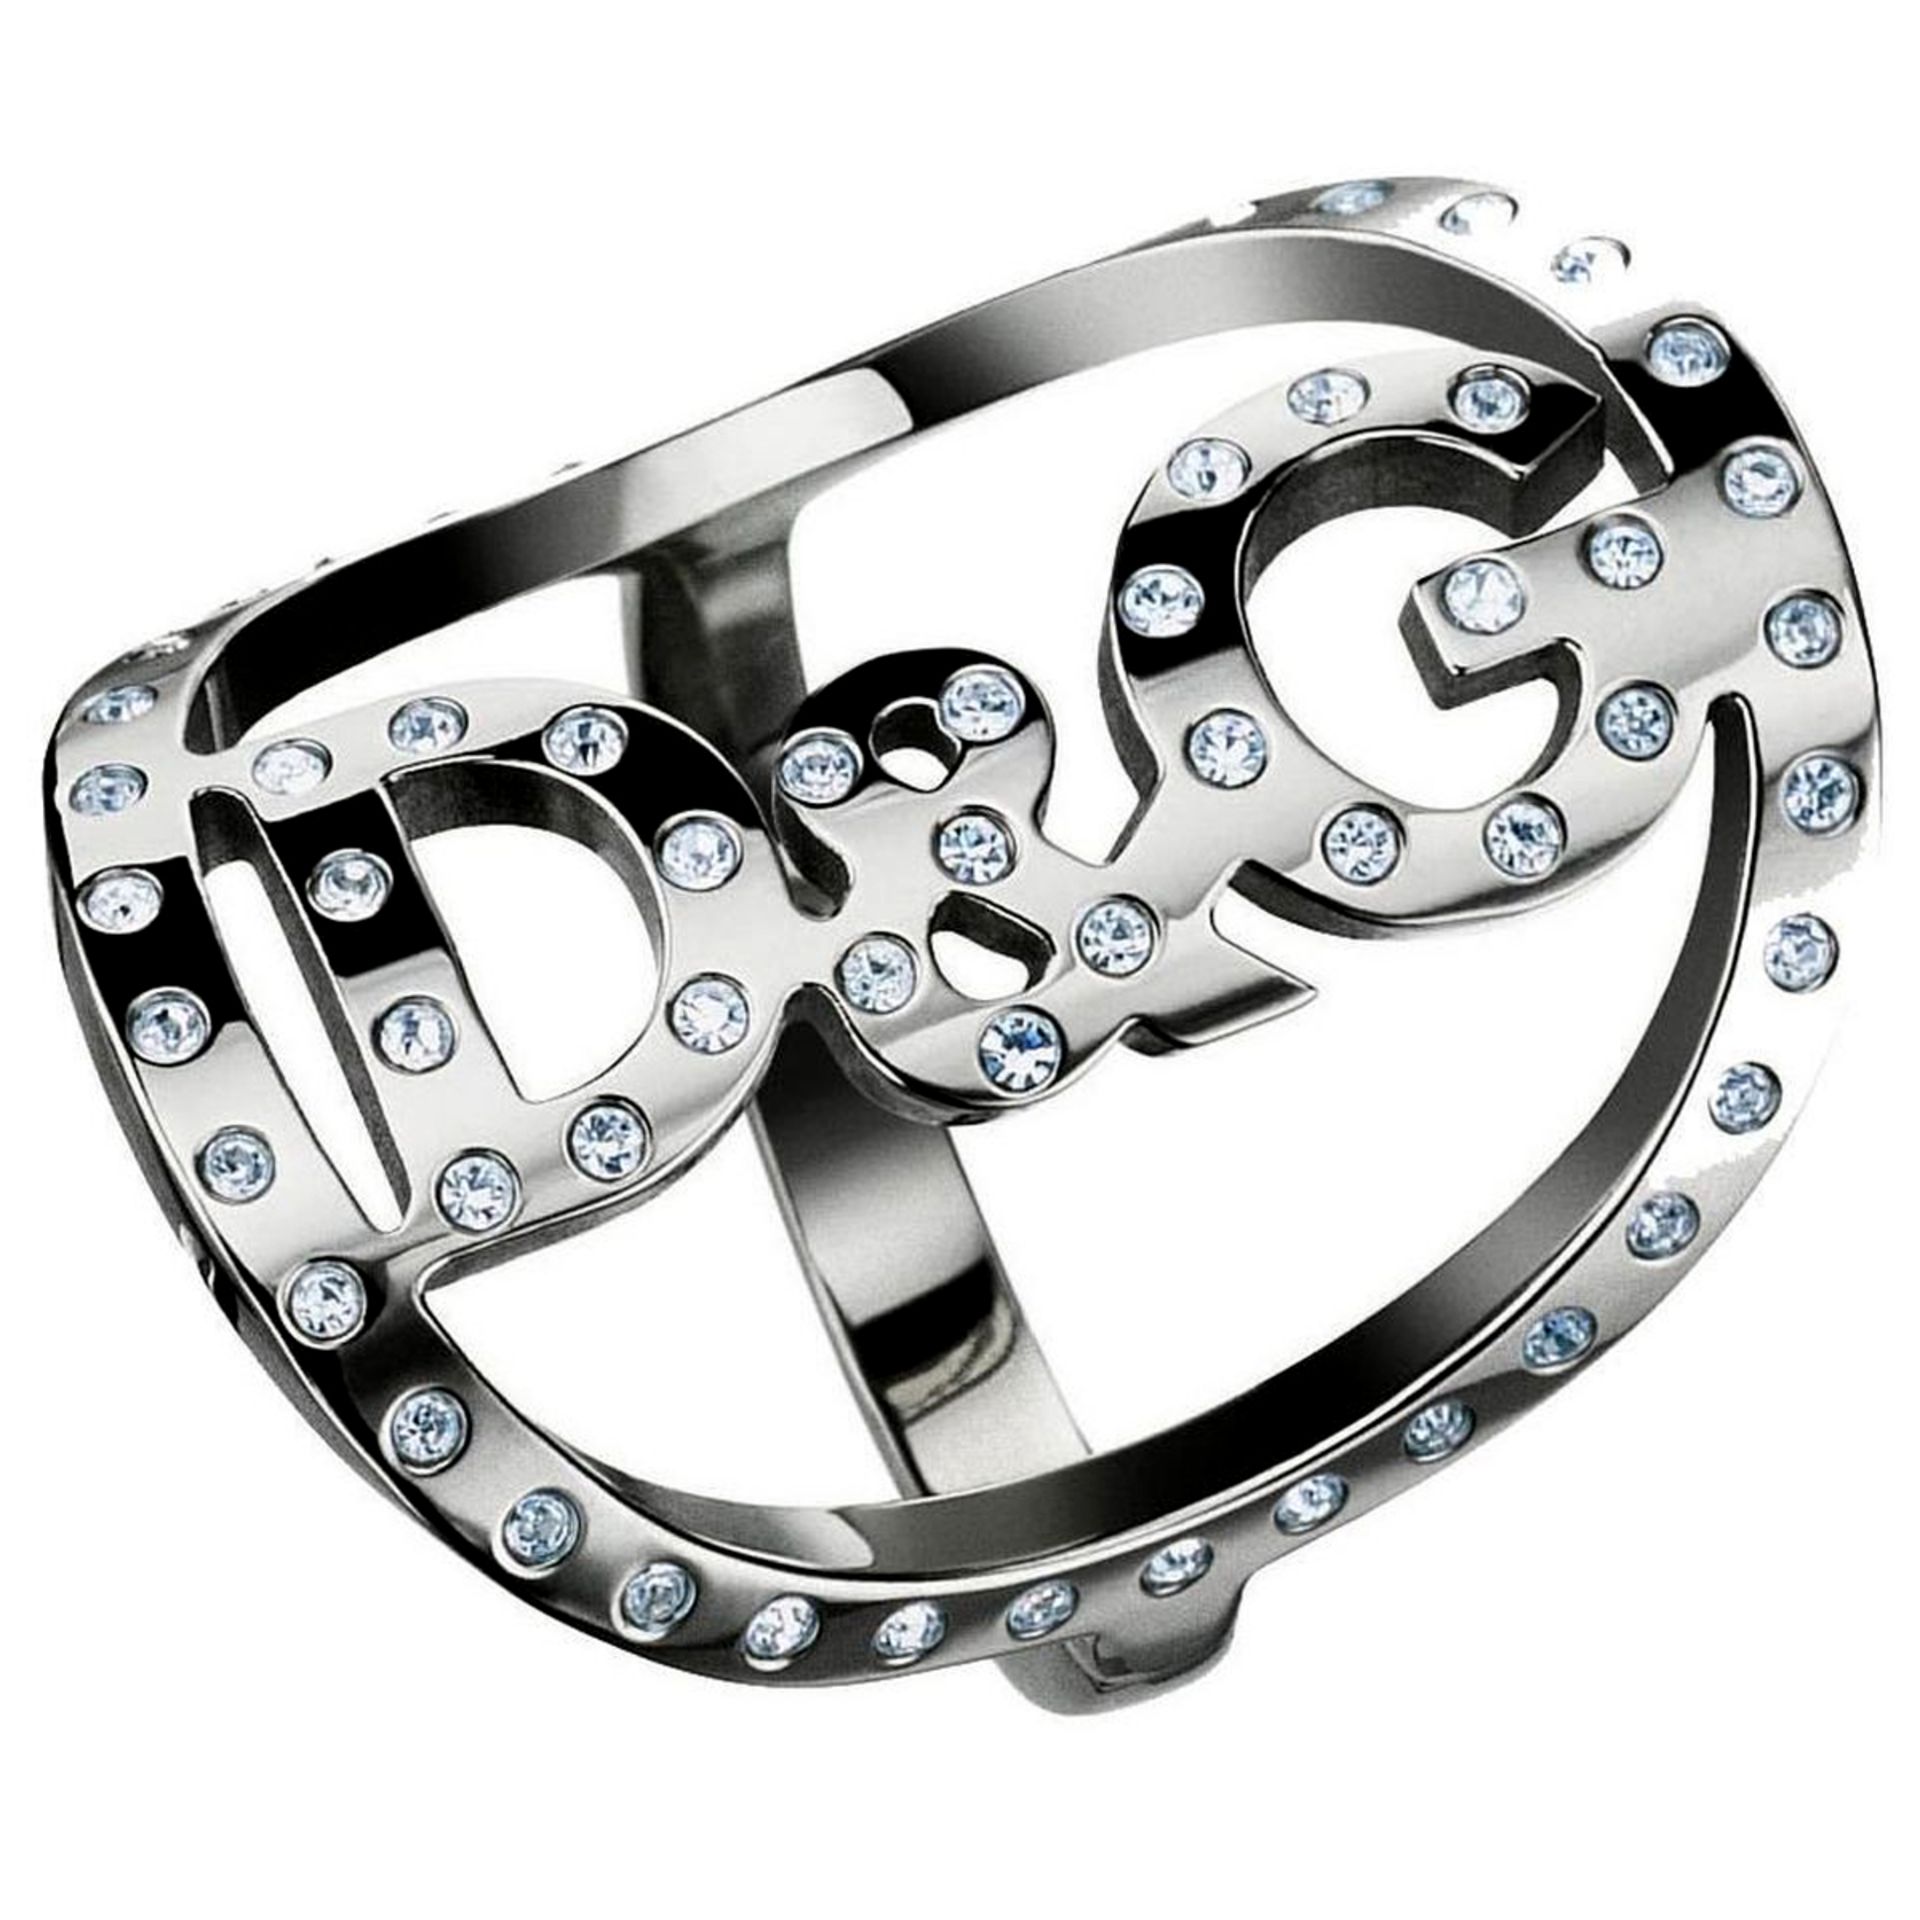 D&G Stars Ring Size 16 (By D&G Jewels). RRP £109 - Brand New & Boxed - Image 3 of 3